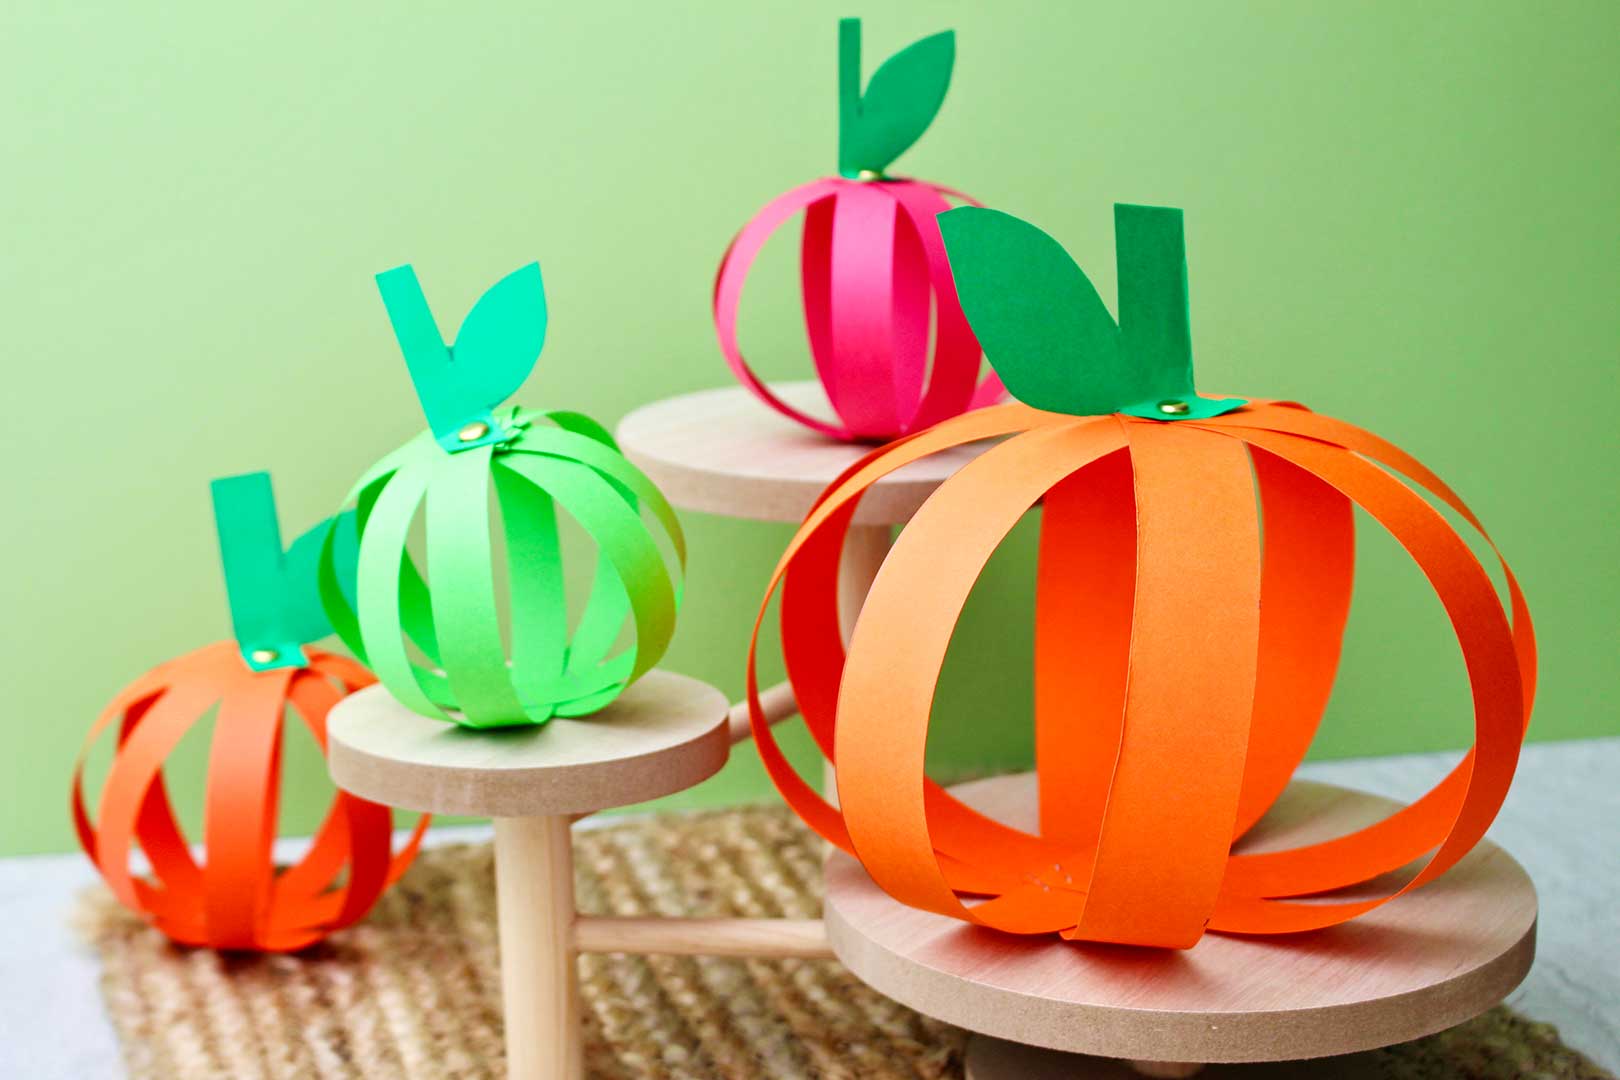 Four completed paper strip pumpkins sitting on wooden pedestals against a green background.